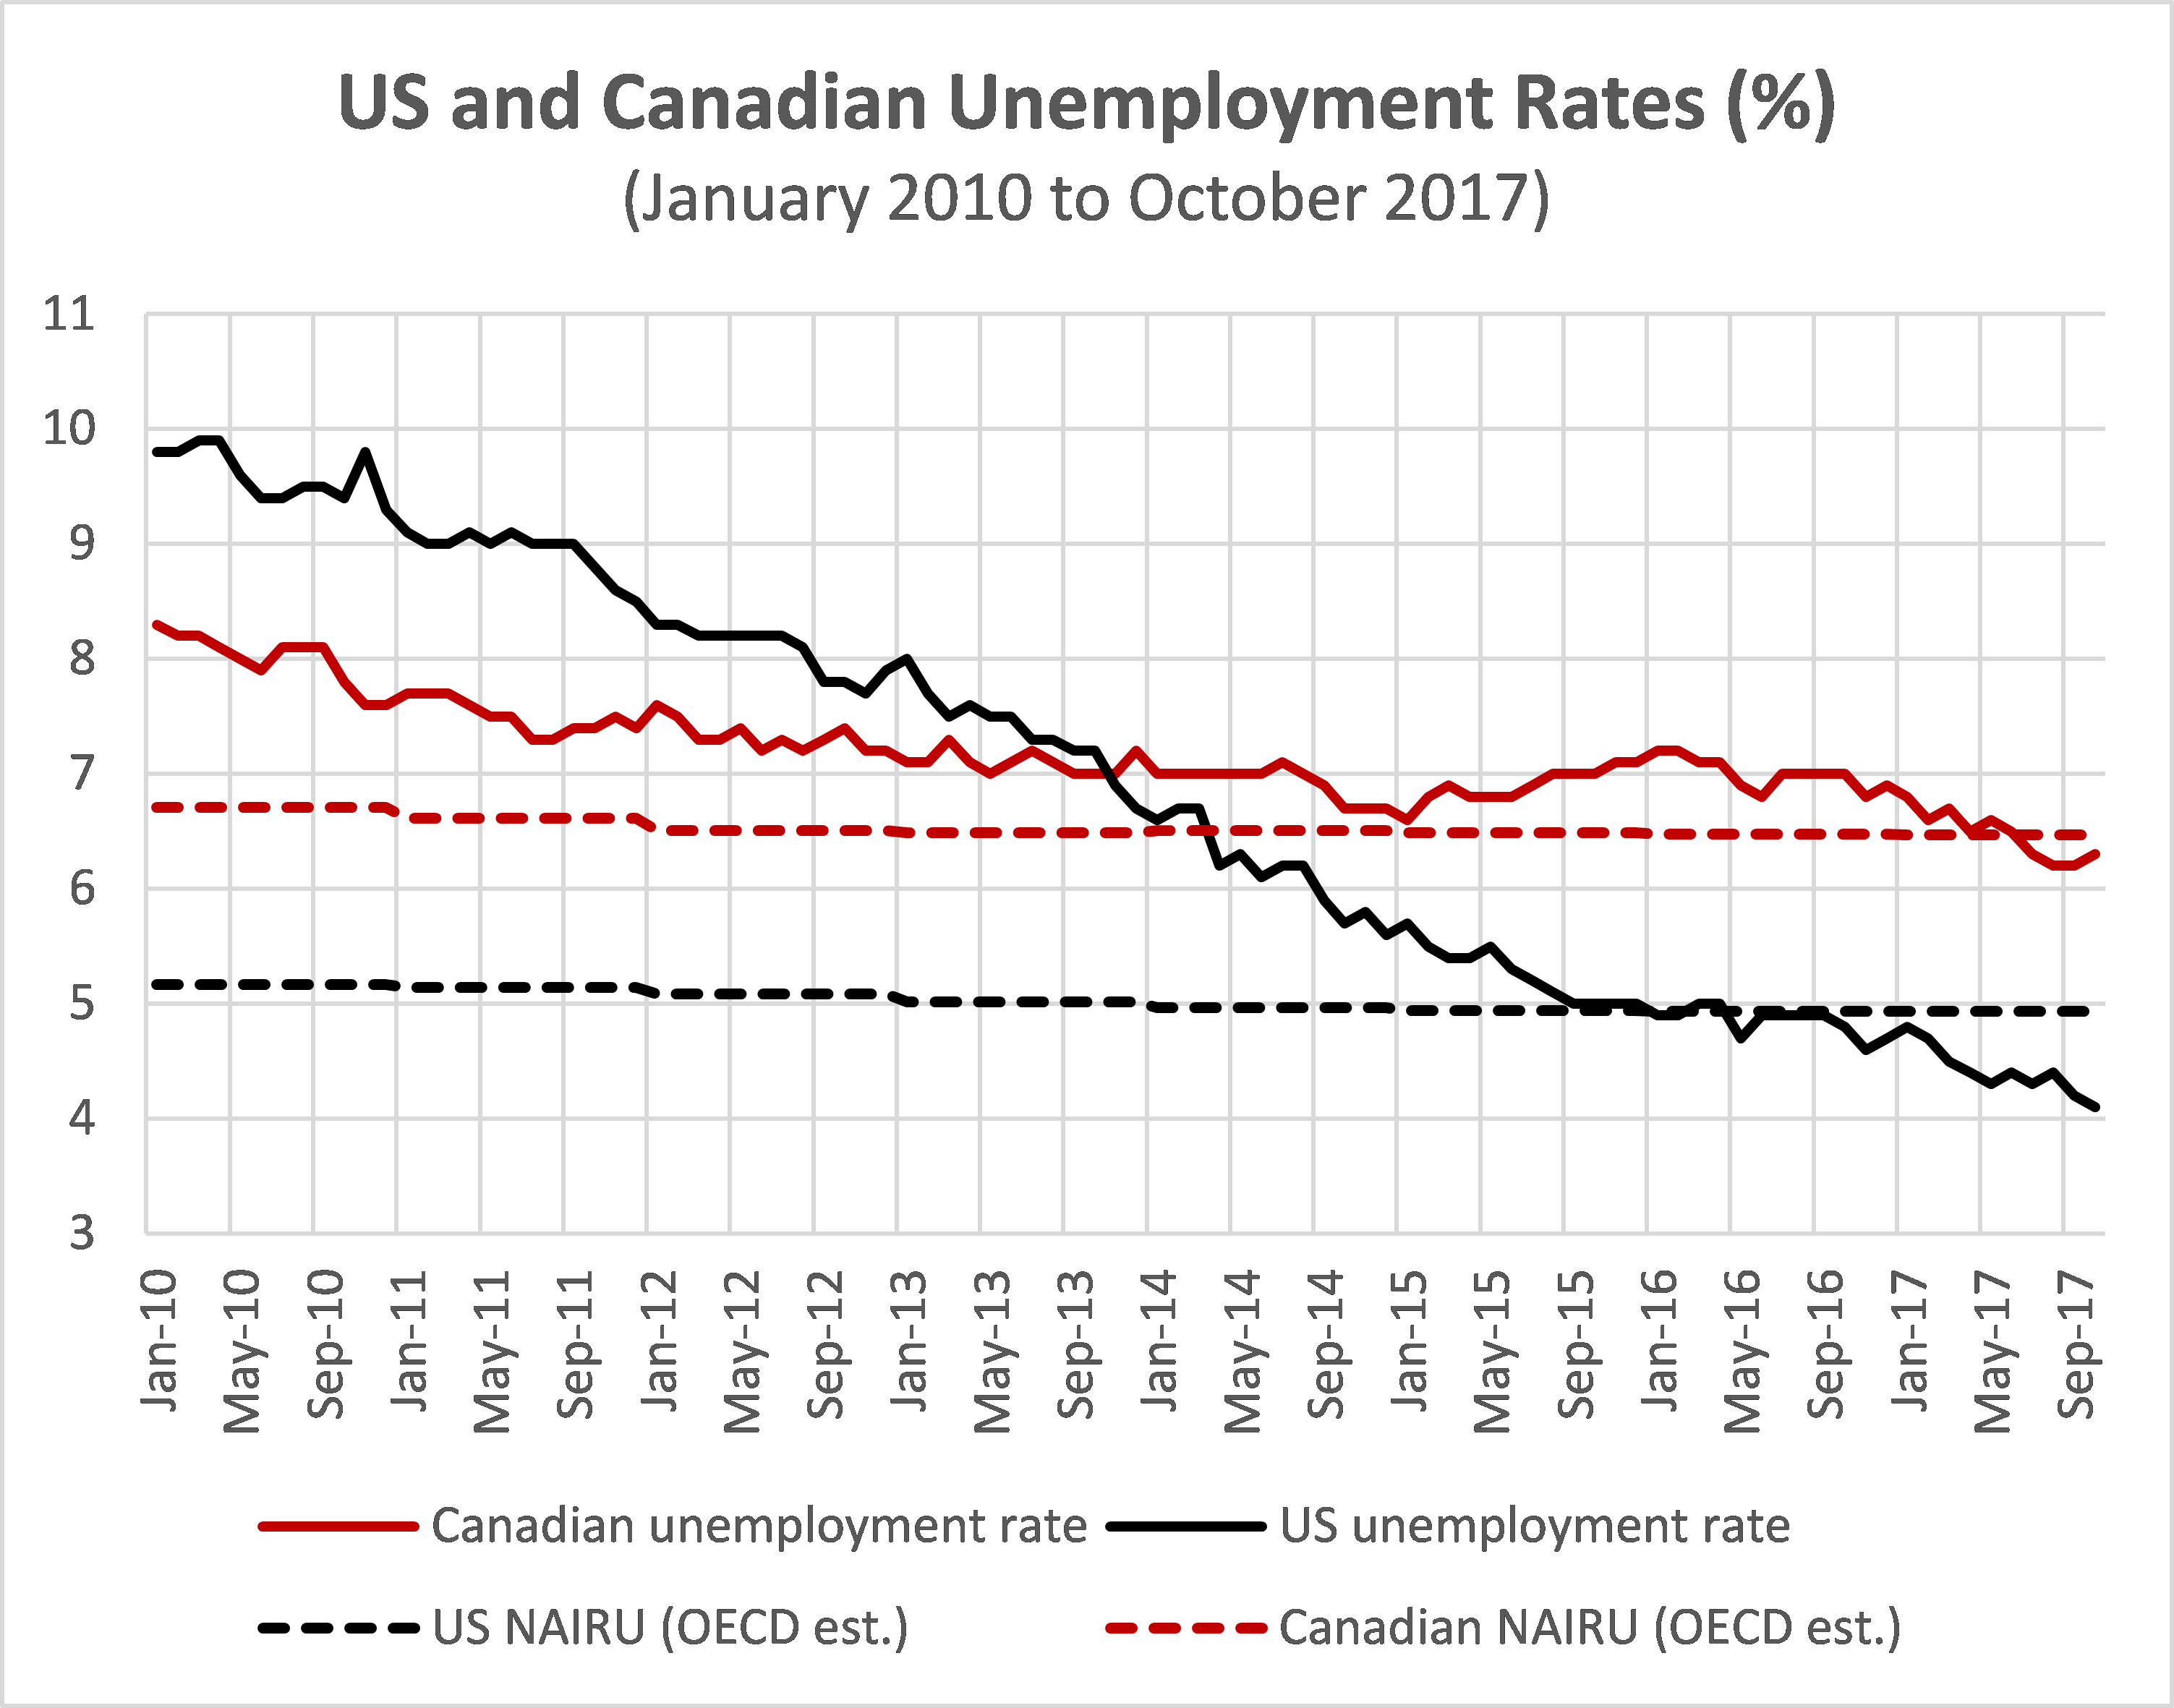 U.S. and Canadian Unemployment Rates